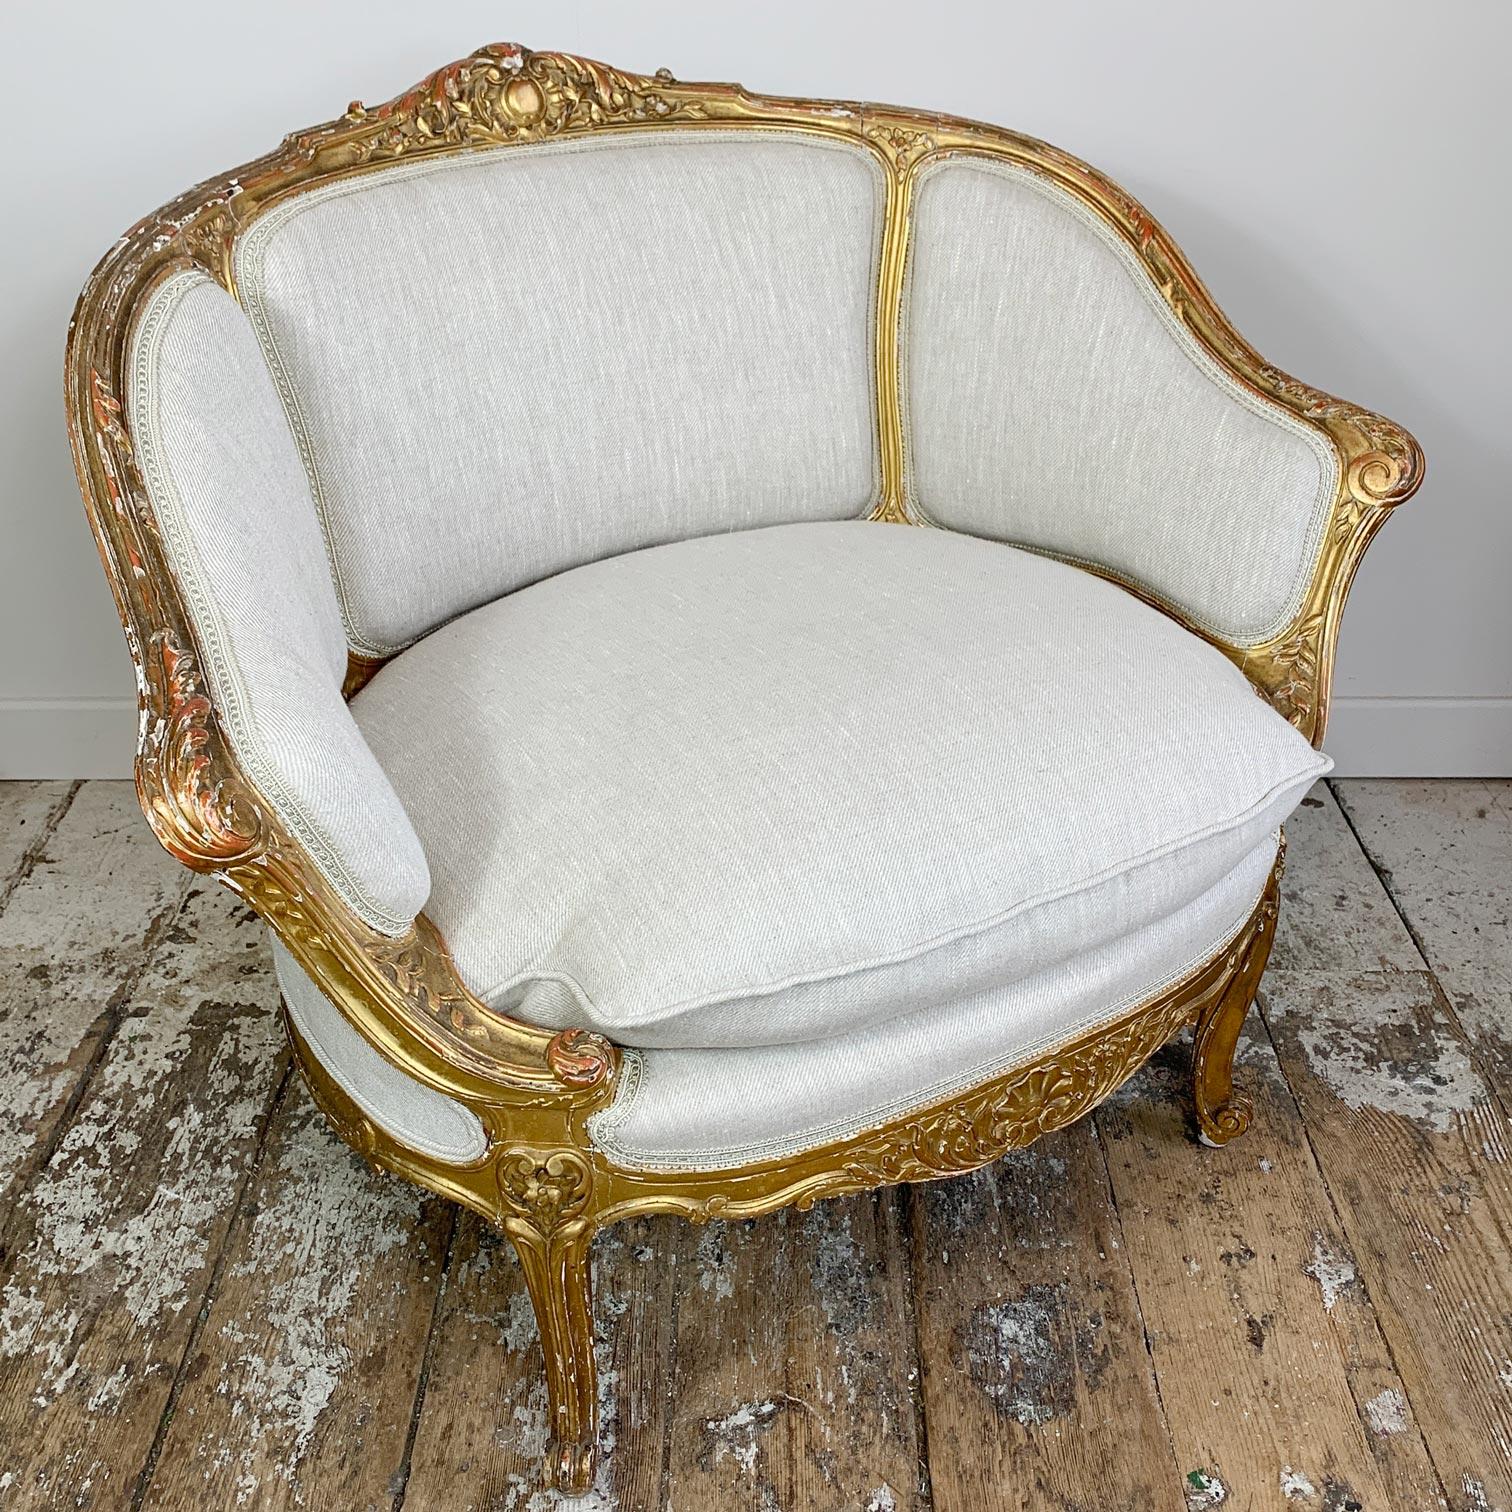 Early 19th Century French 19th C Gilt Wood Louis XV Fauteuil Marquise Chair